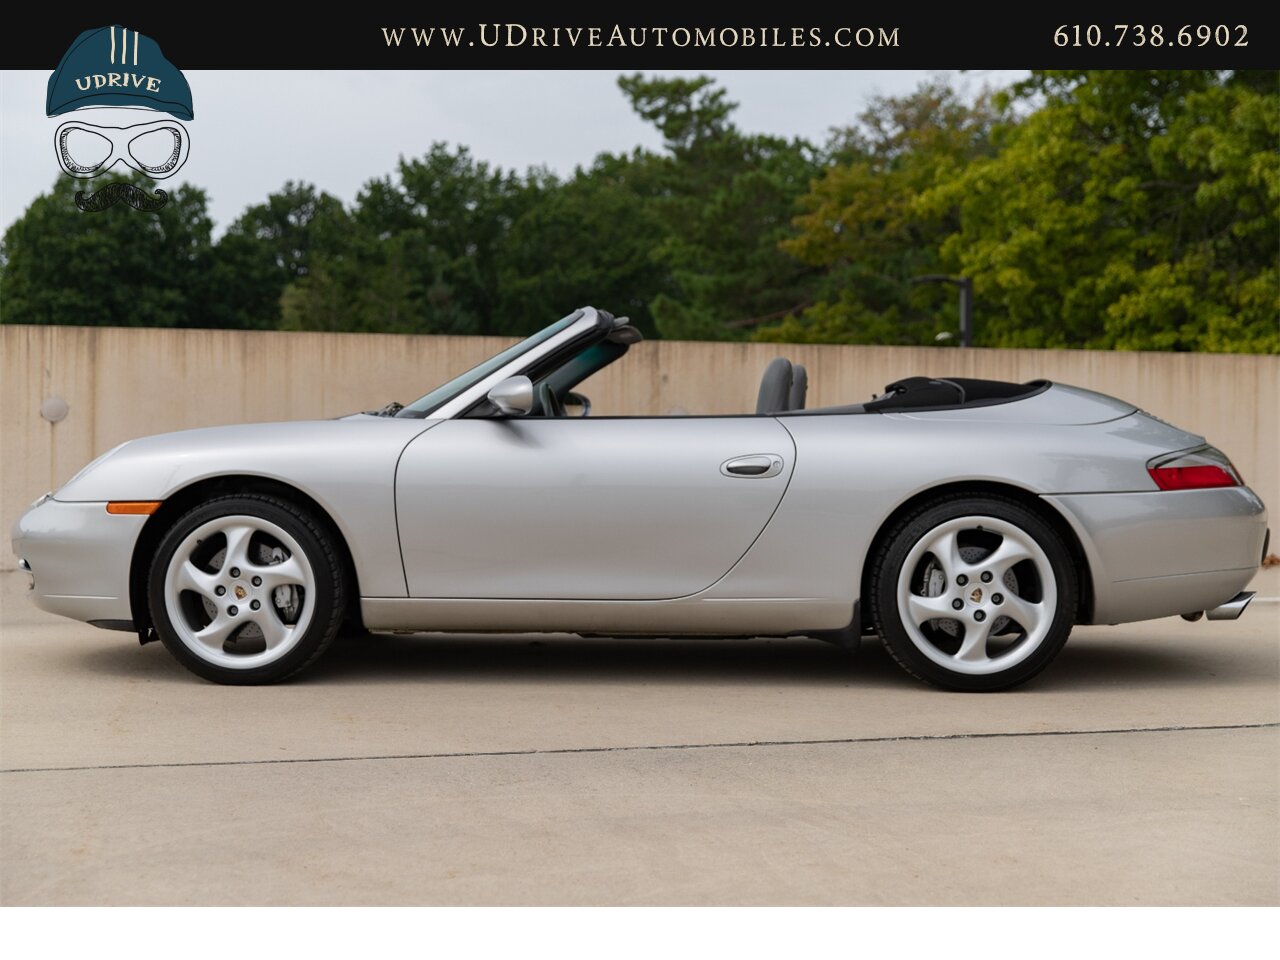 2001 Porsche 911 Carrera 4 Cabriolet Tiptronic IMS Upgrade  Power Seats 18in Turbo Look Wheels 2 Owners $5k Recent Service - Photo 10 - West Chester, PA 19382